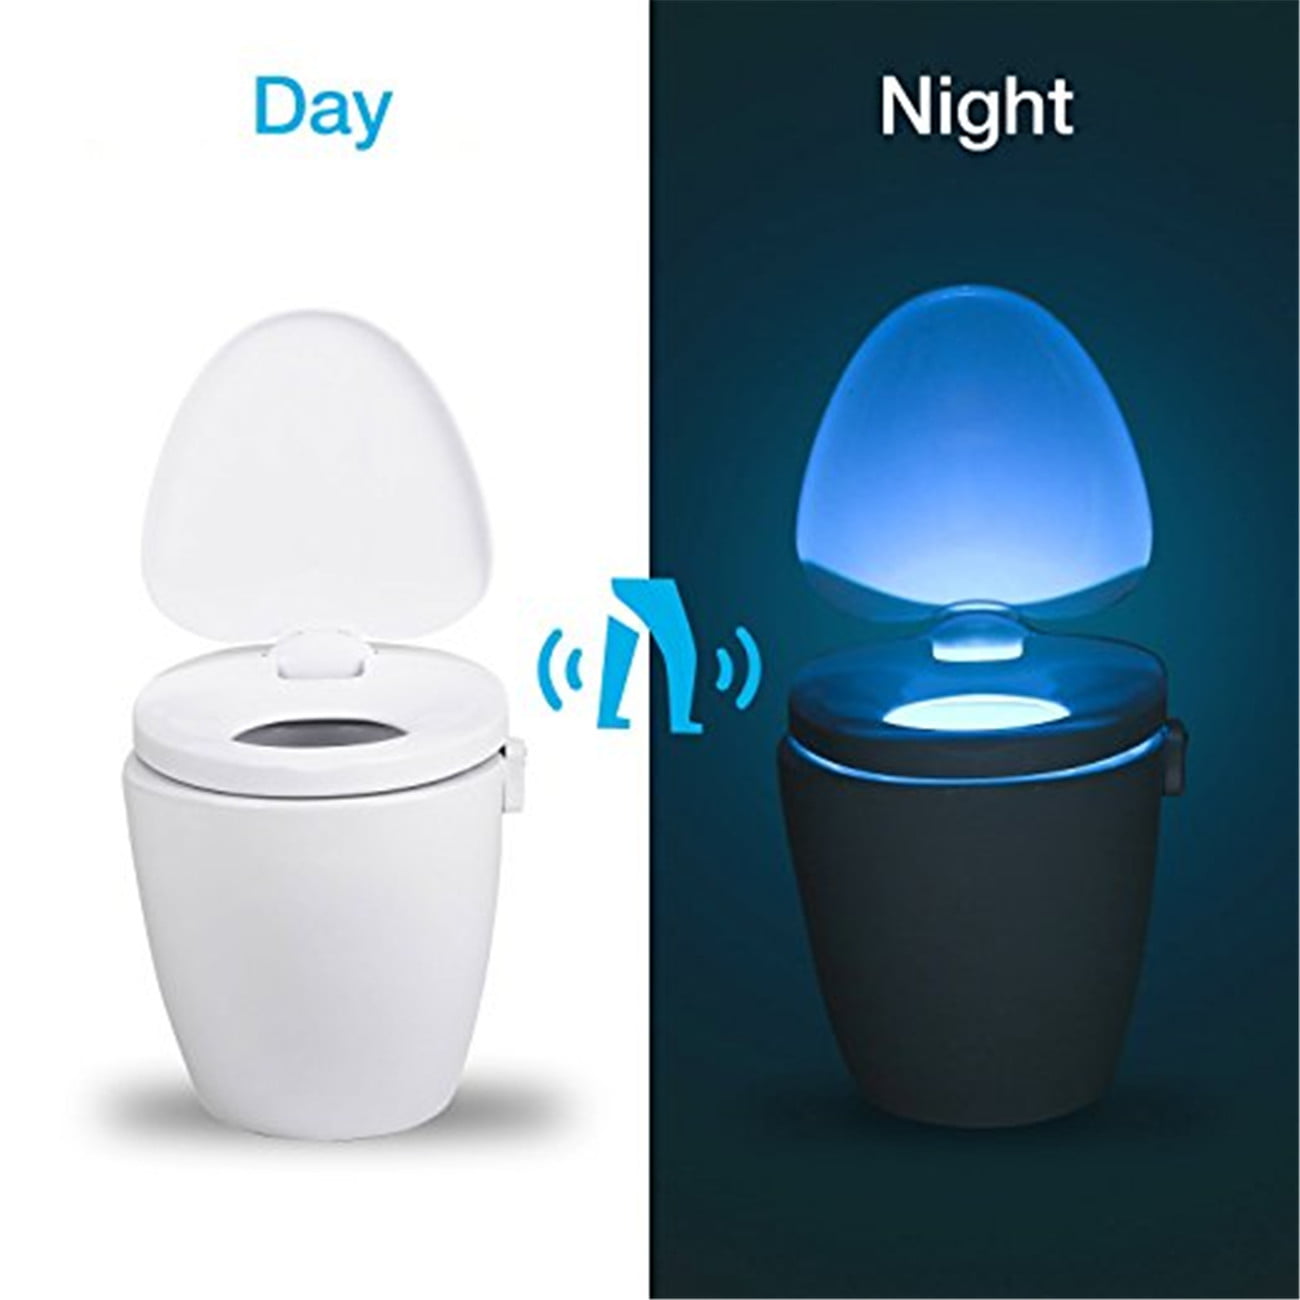 Toilet Night Light(2Pack) by AUSAYE, 8-Color Led Motion Activated Toilet  Seat Light, Fit Any Toilet Bowl,Toilet Bowl Light with Two Mode Motion  Sensor LED Washroom Night Light (Color: Two Packs)